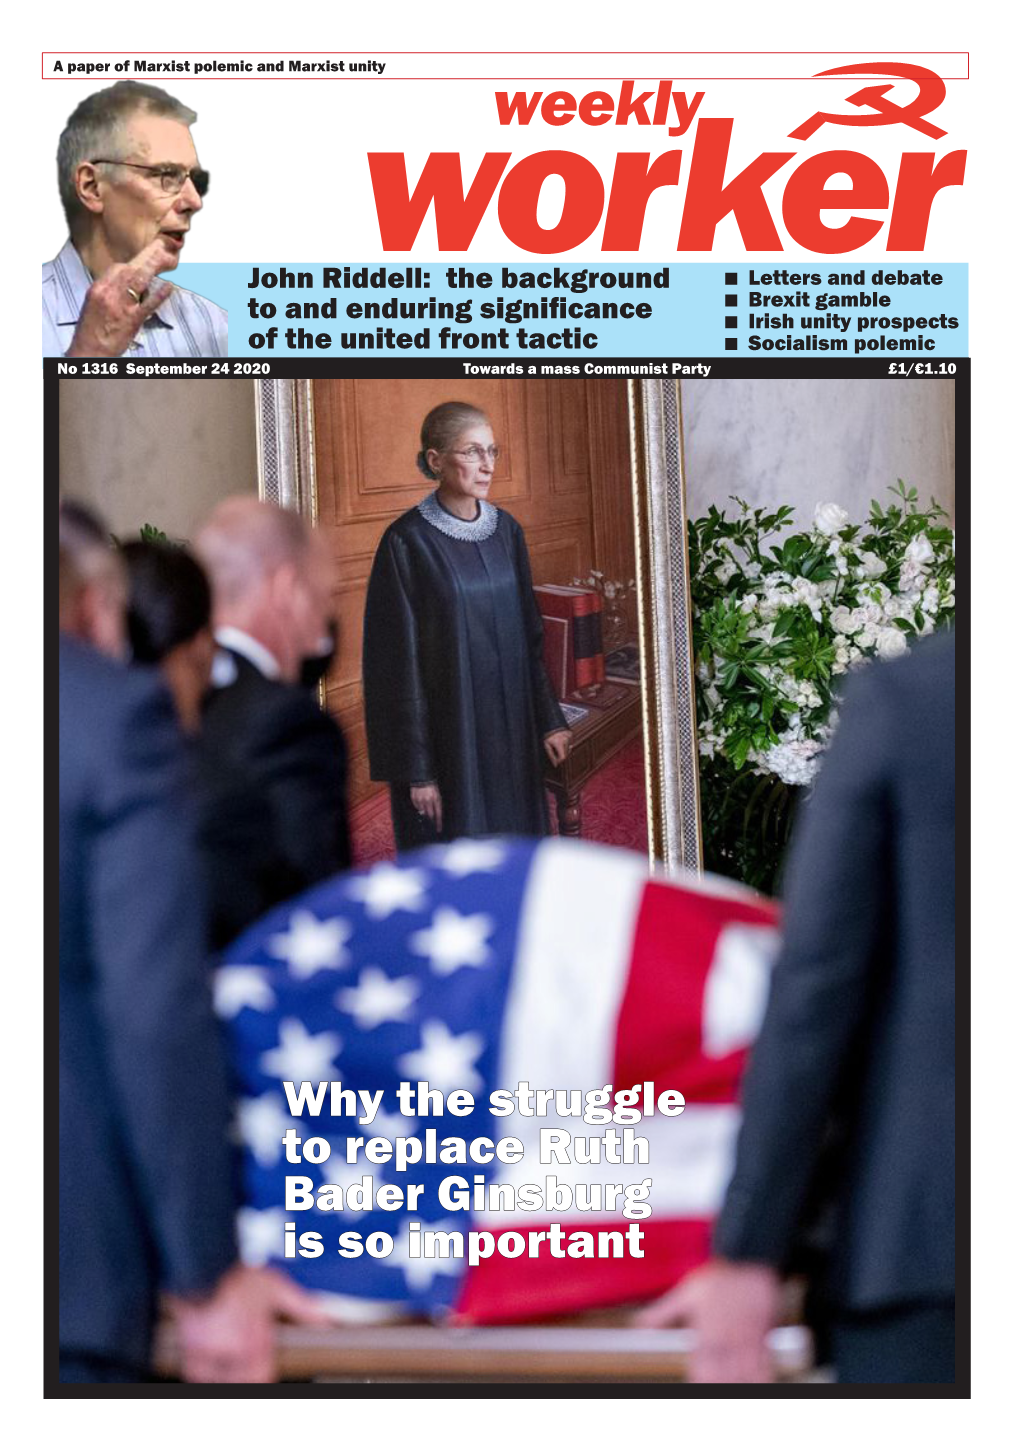 Why the Struggle to Replace Ruth Bader Ginsburg Is So Important Weekly 2 September 24 2020 1316 Worker LETTERS